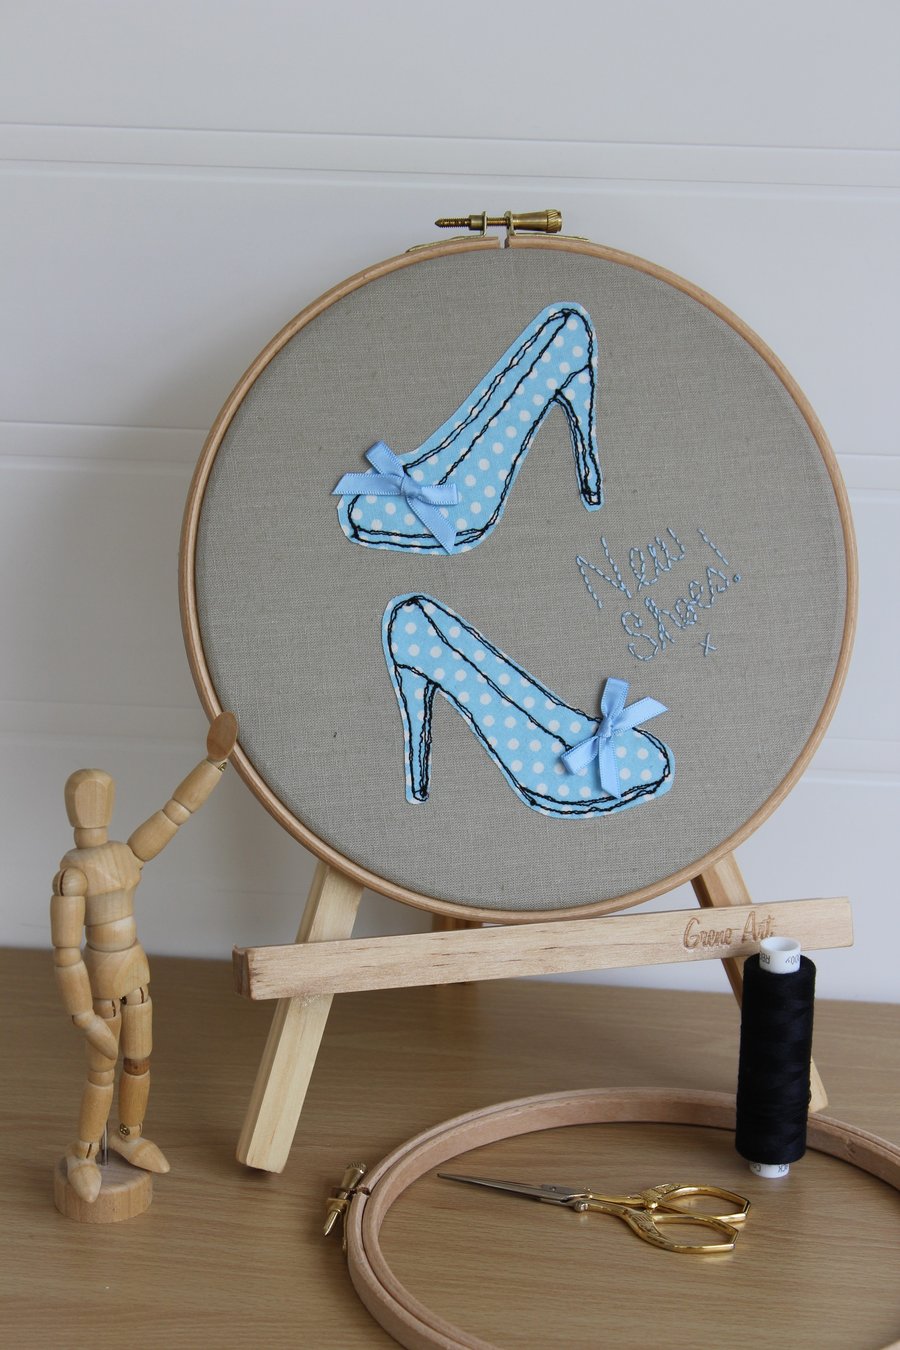 New Shoes Hooped Textile Art,  Applique and Freemotion Embroidered, Blue 